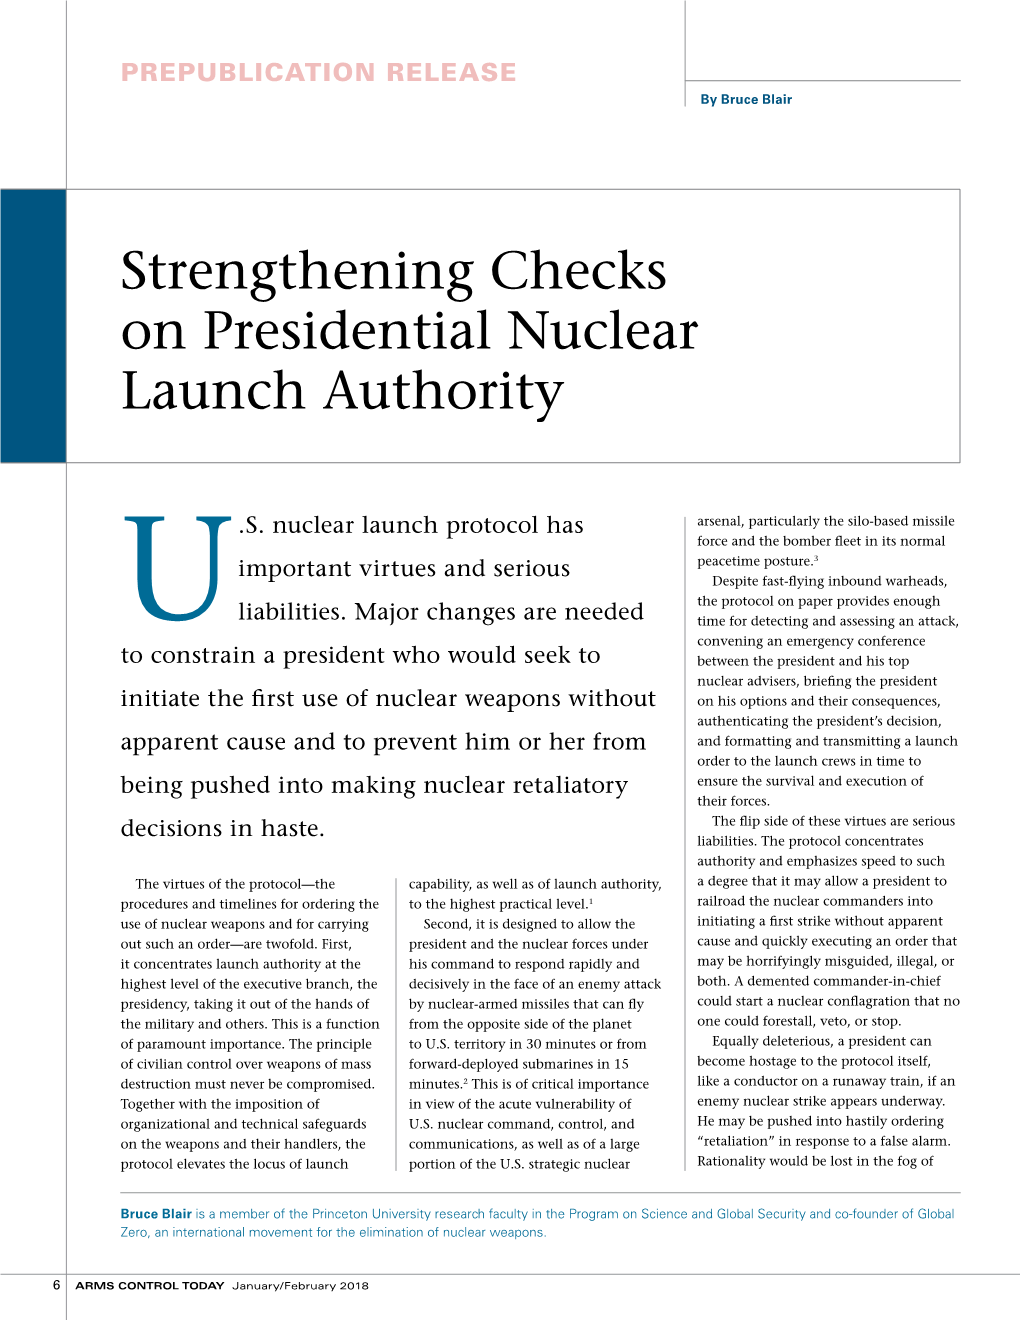 Strengthening Checks on Presidential Nuclear Launch Authority